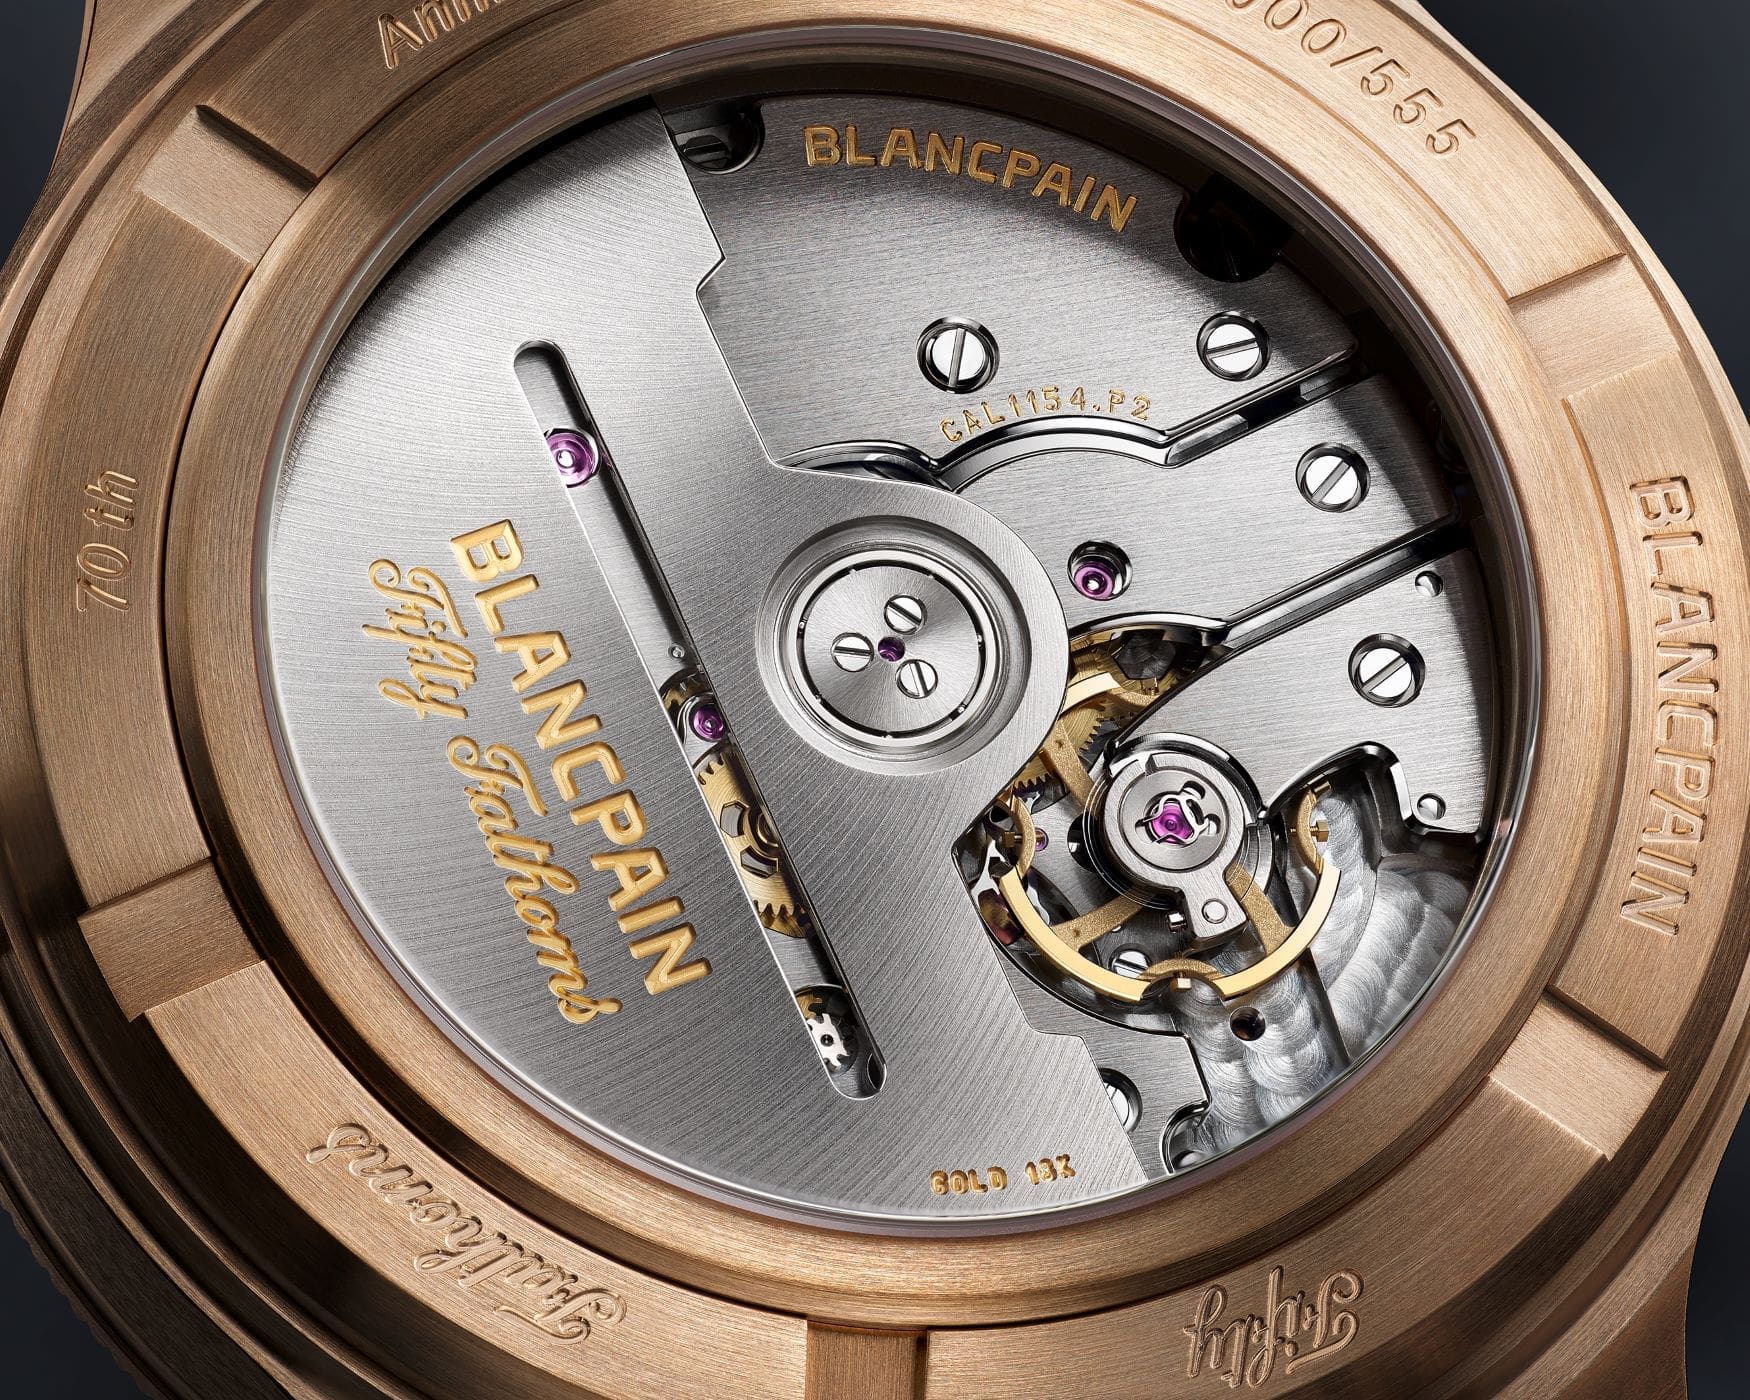 Blancpain Fifty Fathoms 70th Anniversary Act 3 movement